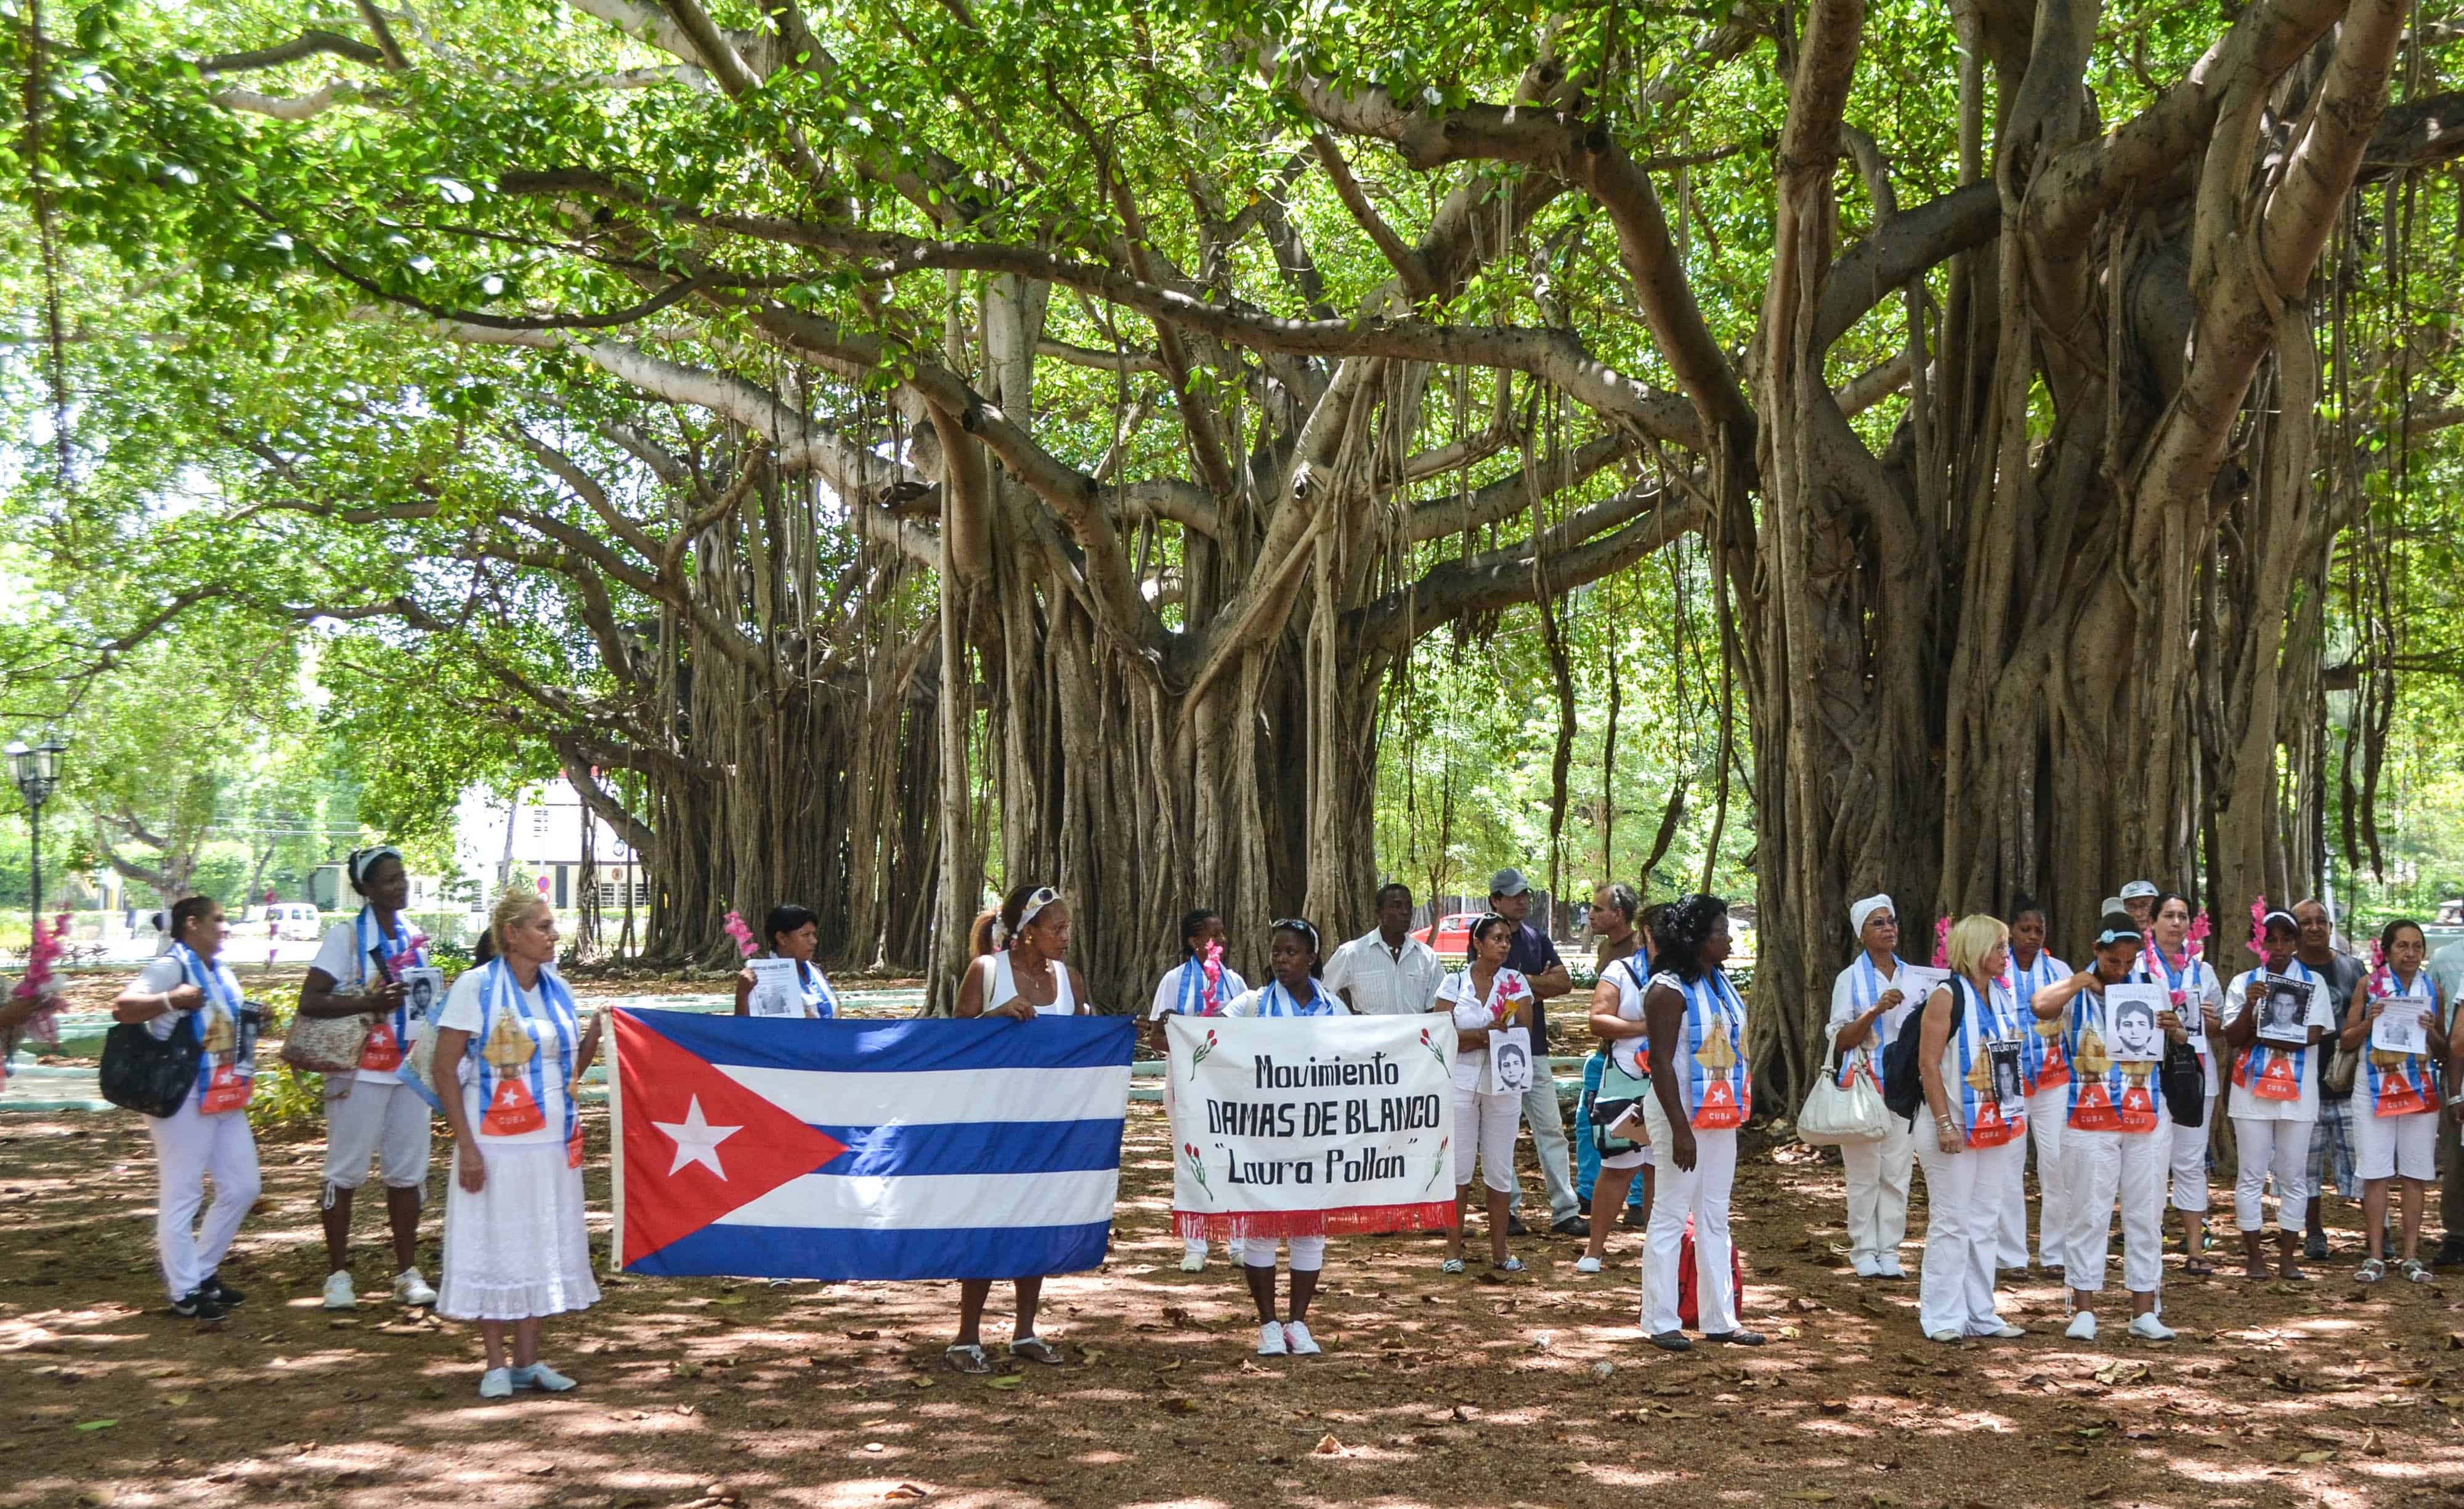 Cuban dissidents and members of the Ladies in White human rights group hold a Cuban national flag and pictures of imprisoned dissidents.